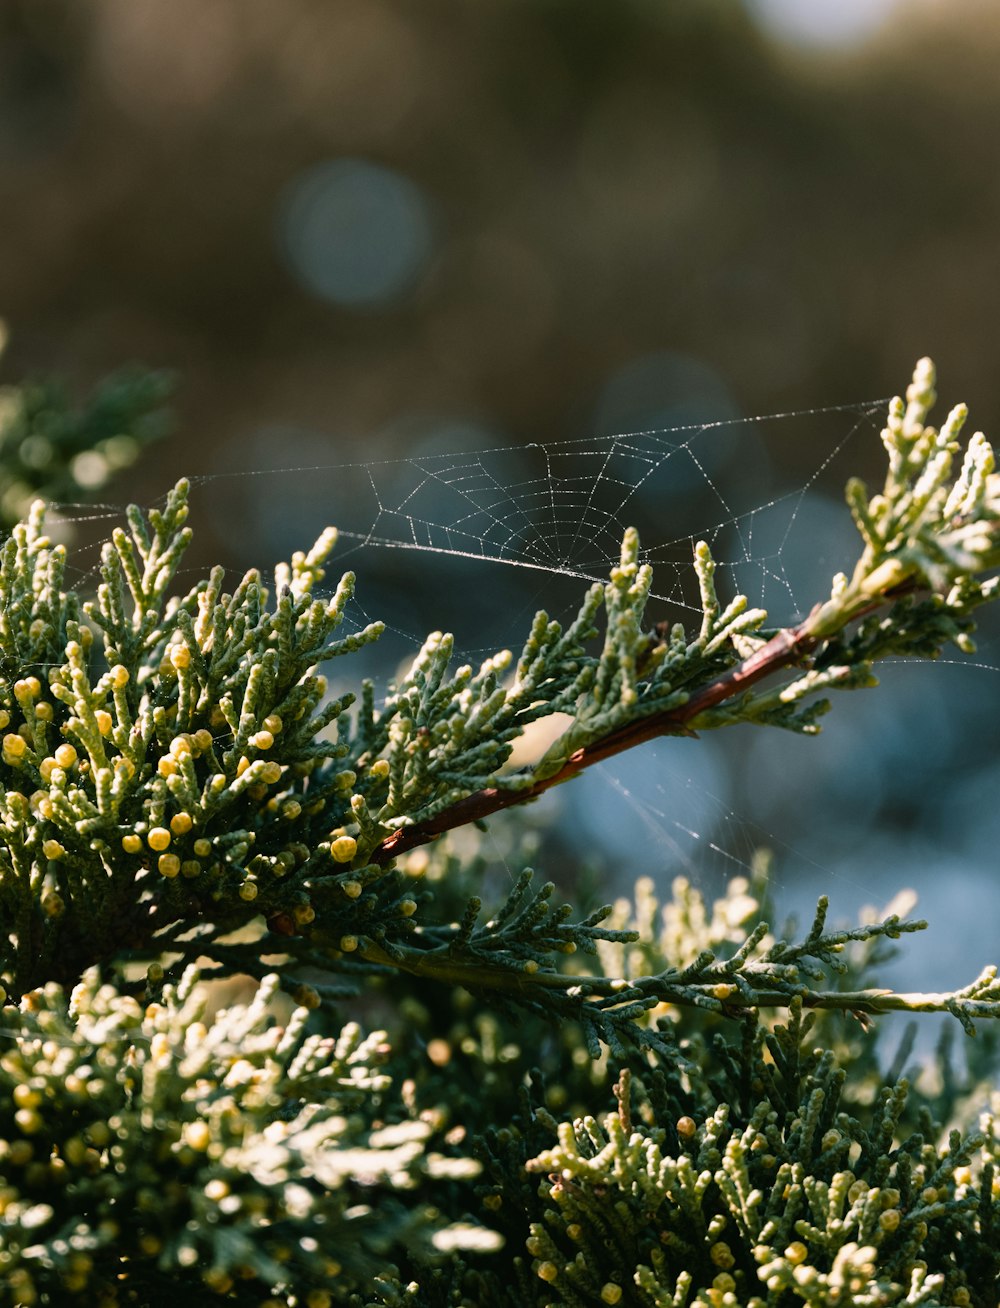 a close up of a tree branch with a spider web on it